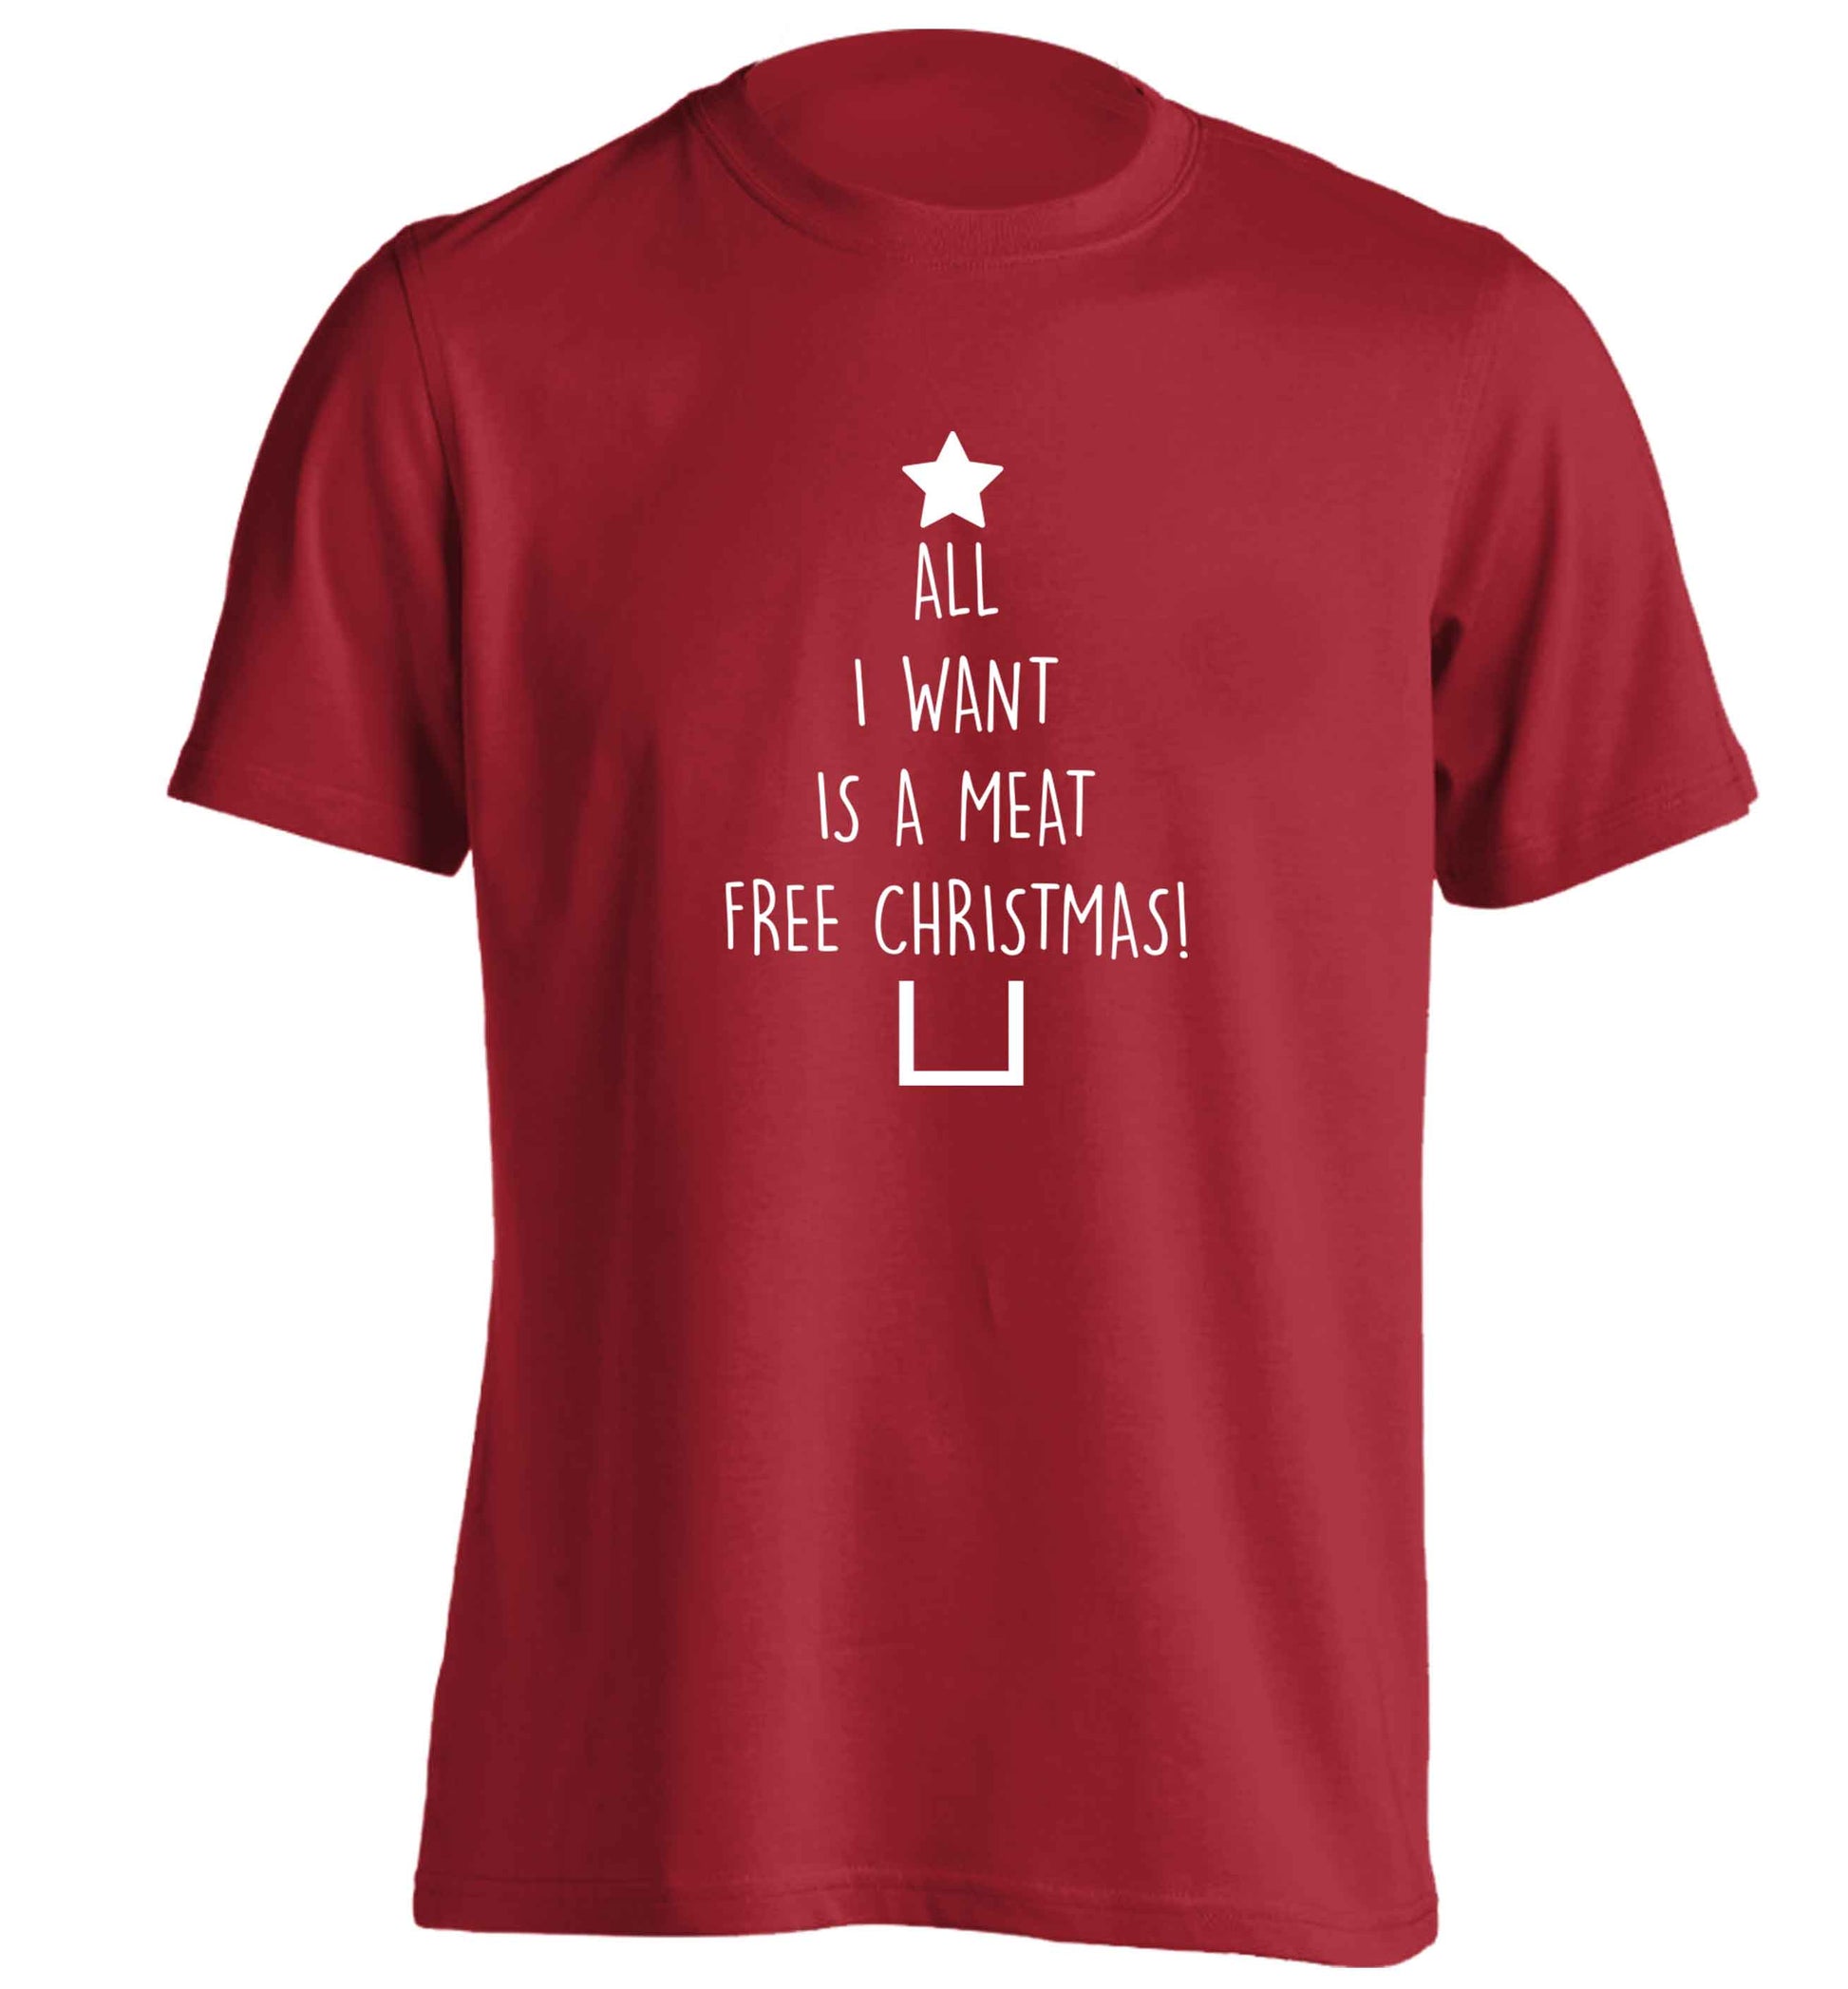 All I want is a meat free Christmas adults unisex red Tshirt 2XL